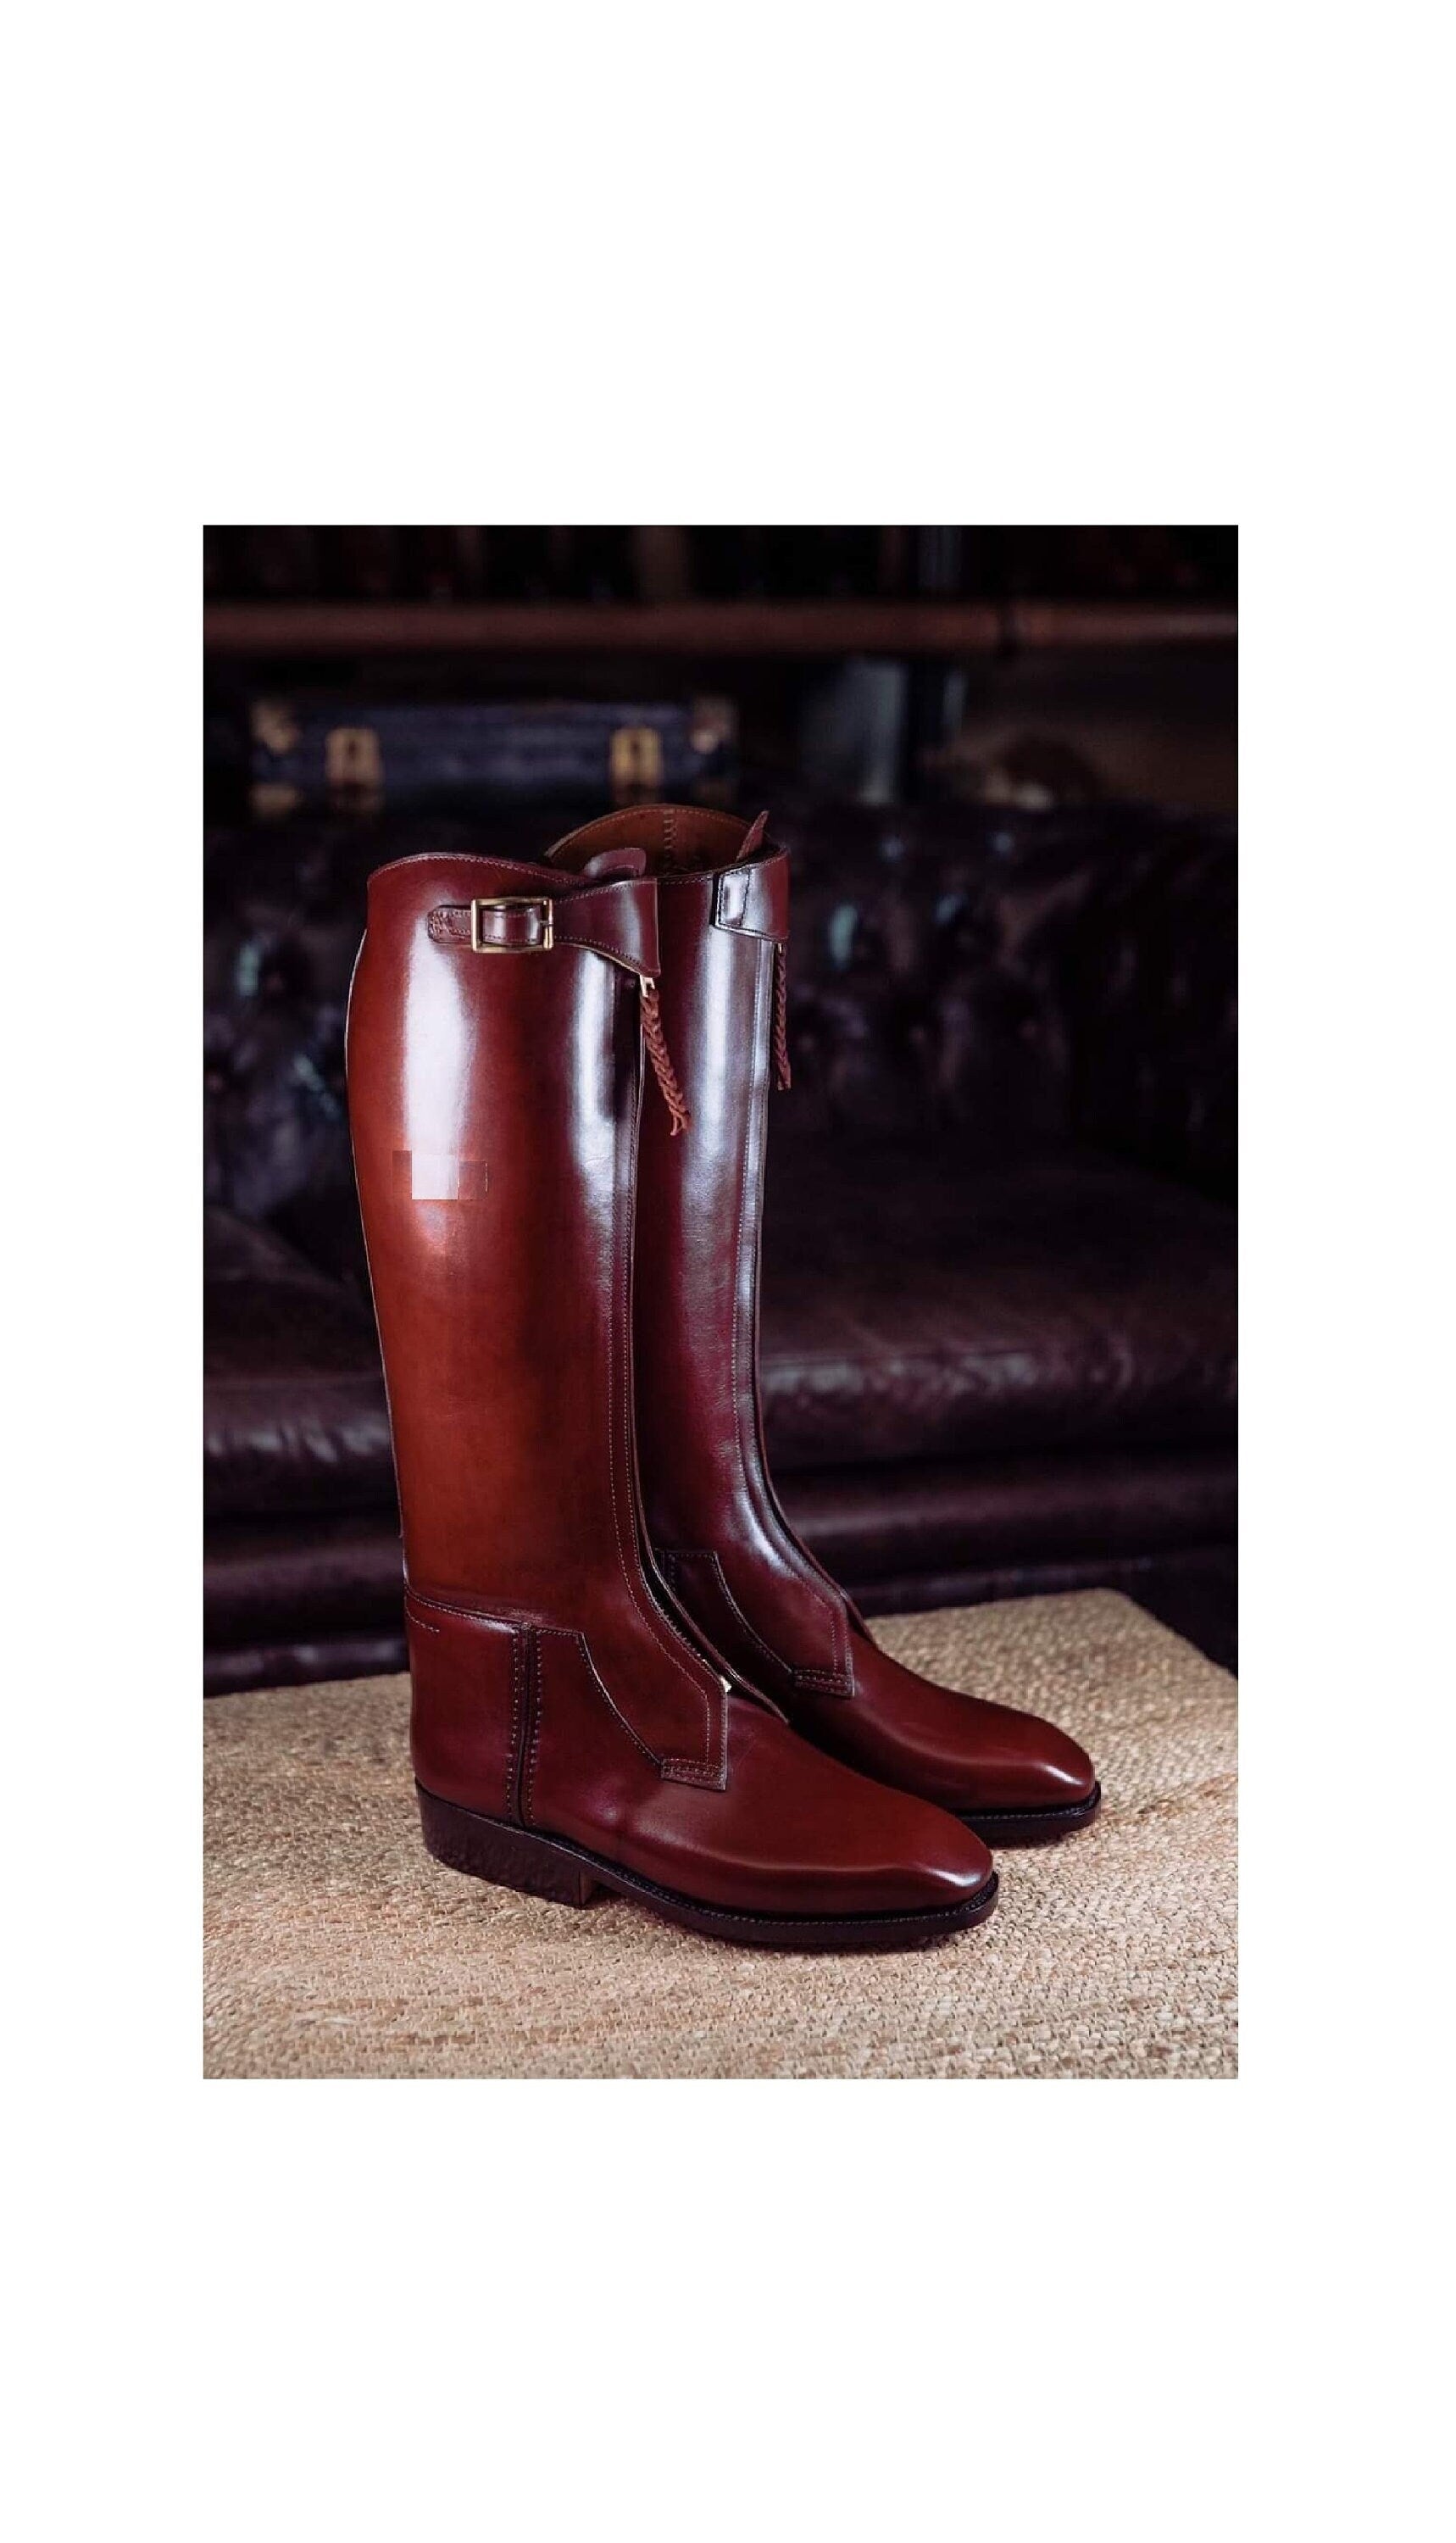 Handmade Men's Cowboy Style Burgundy Color Genuine Leather Knee High Boots For Men's